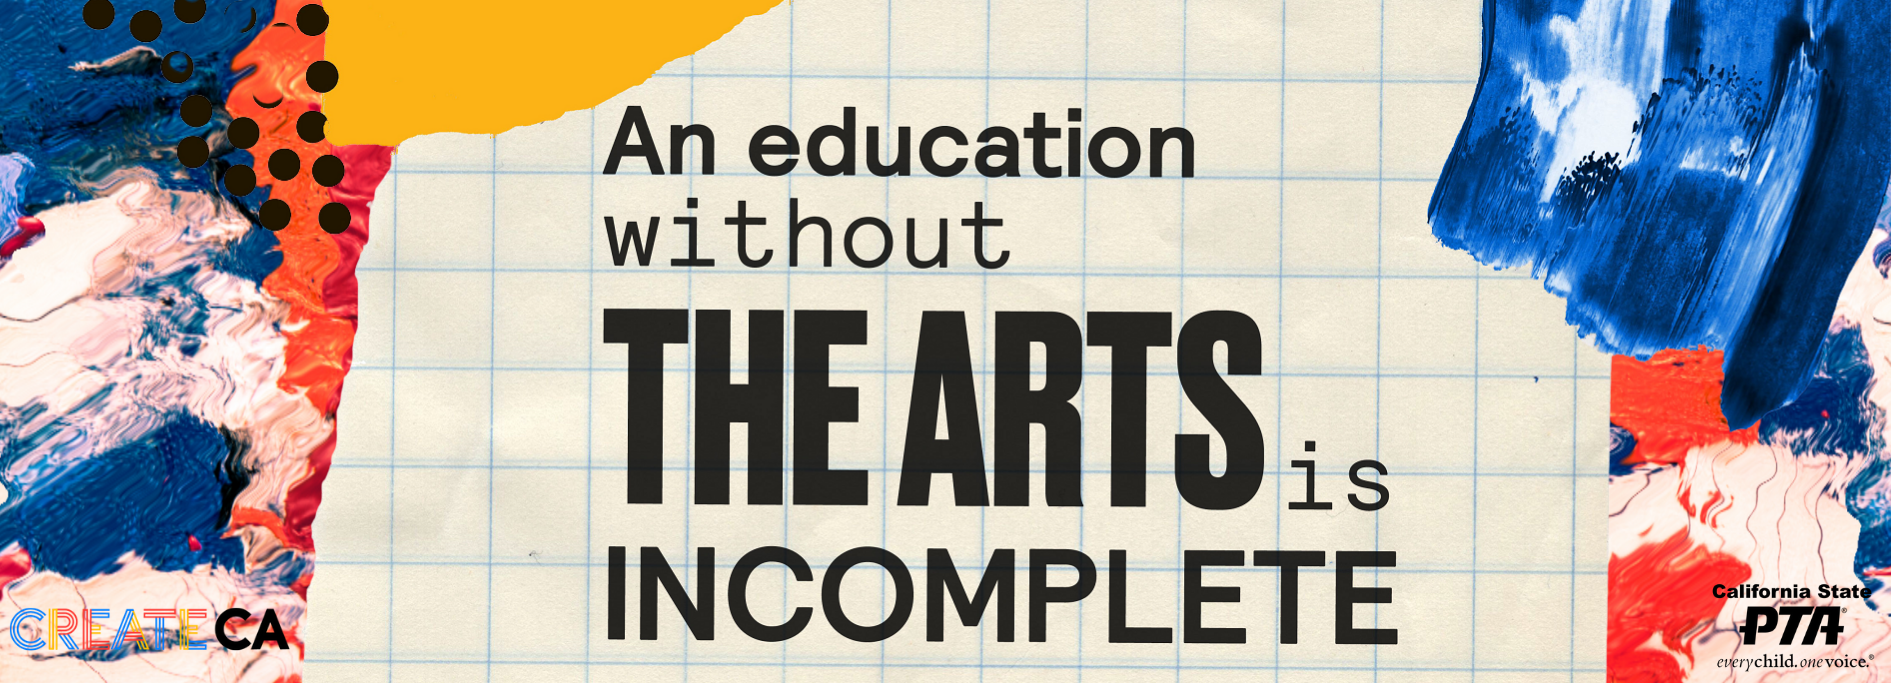 the role of arts in education essay